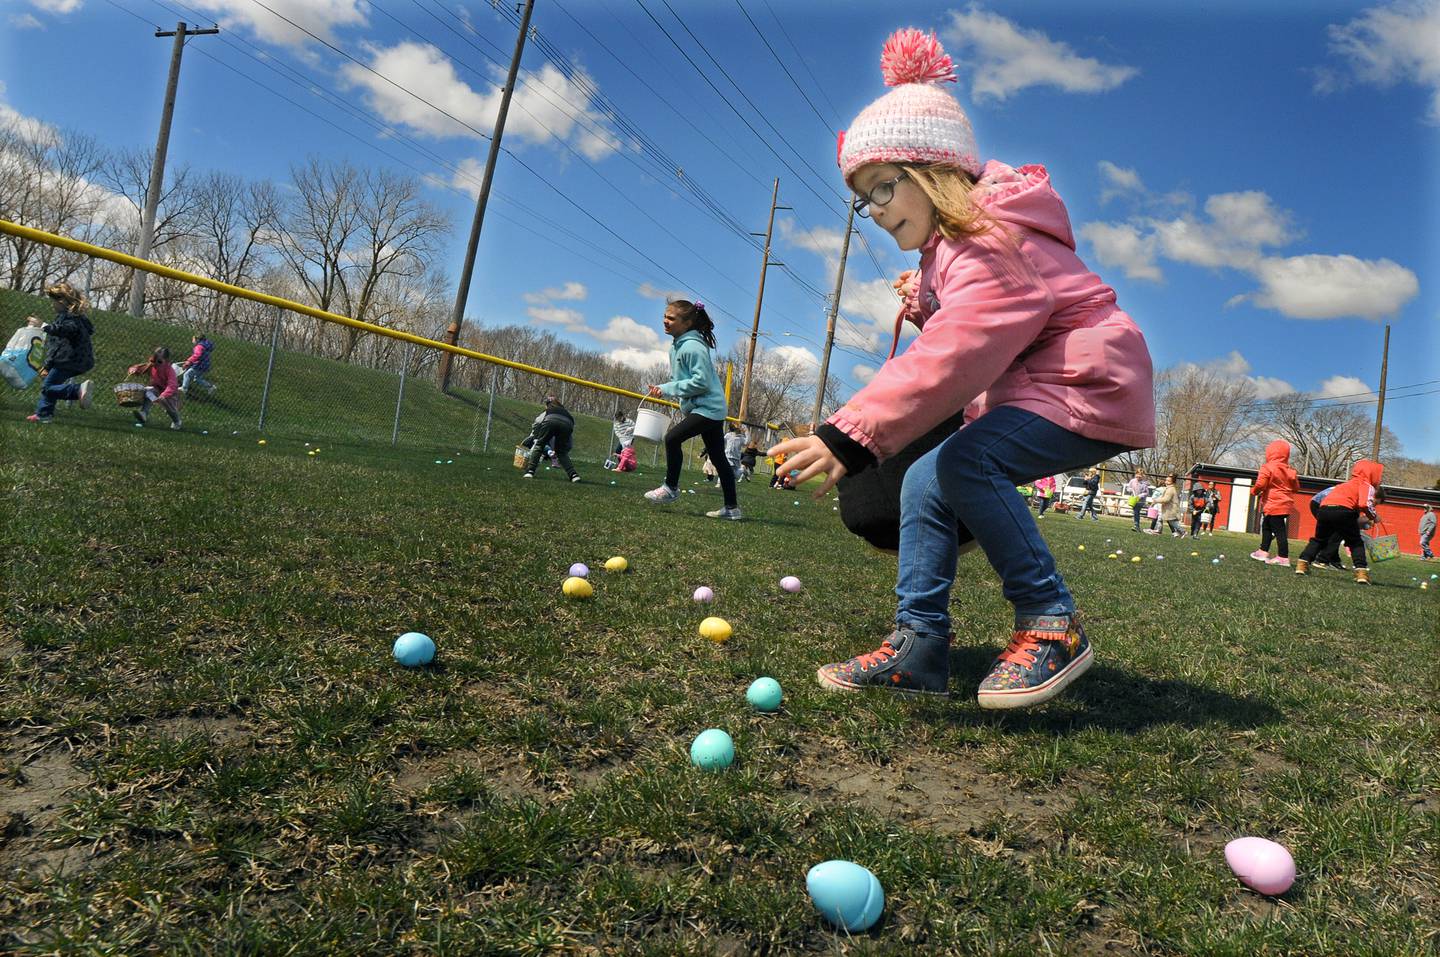 Hundreds of children participated Saturday, April 9, 2022, at Guthrie Park in Marseilles for the 39th annual Easter egg hunt sponsored by The Marseilles Recreational Board.